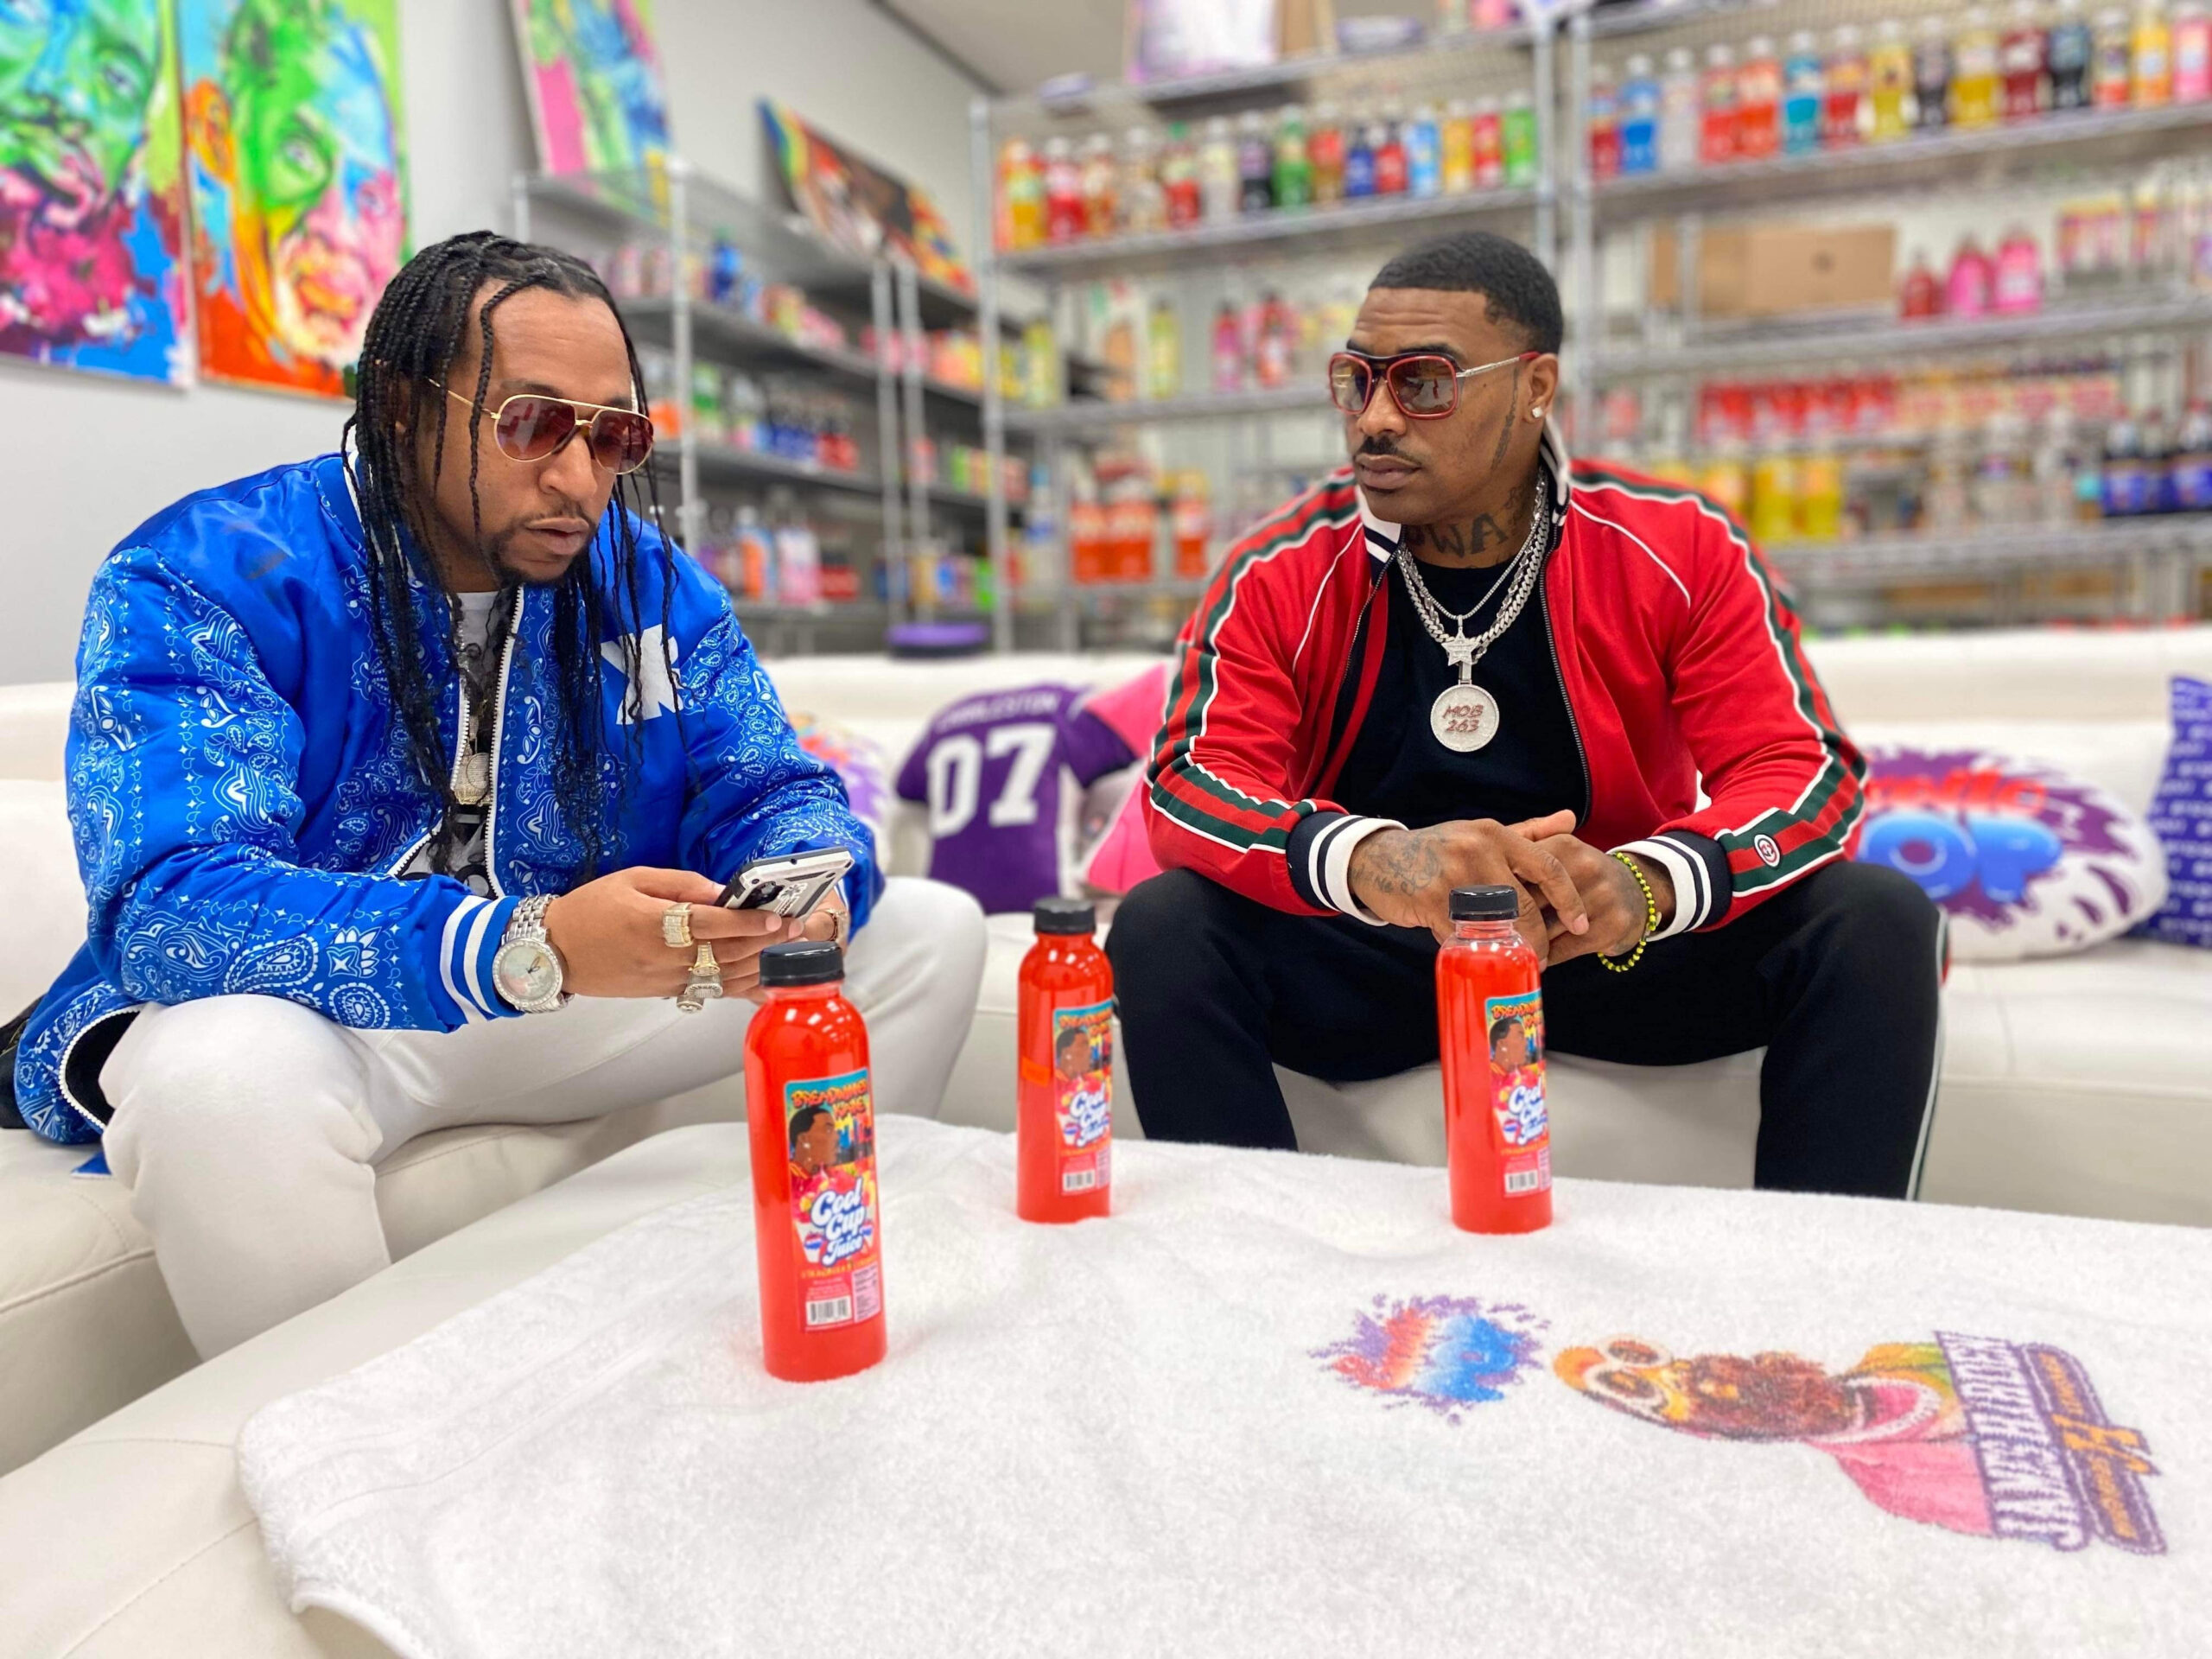 Breadwinner Kane Collaborates with Exotic Pop to Release New Flavor of Cool Cup Juice